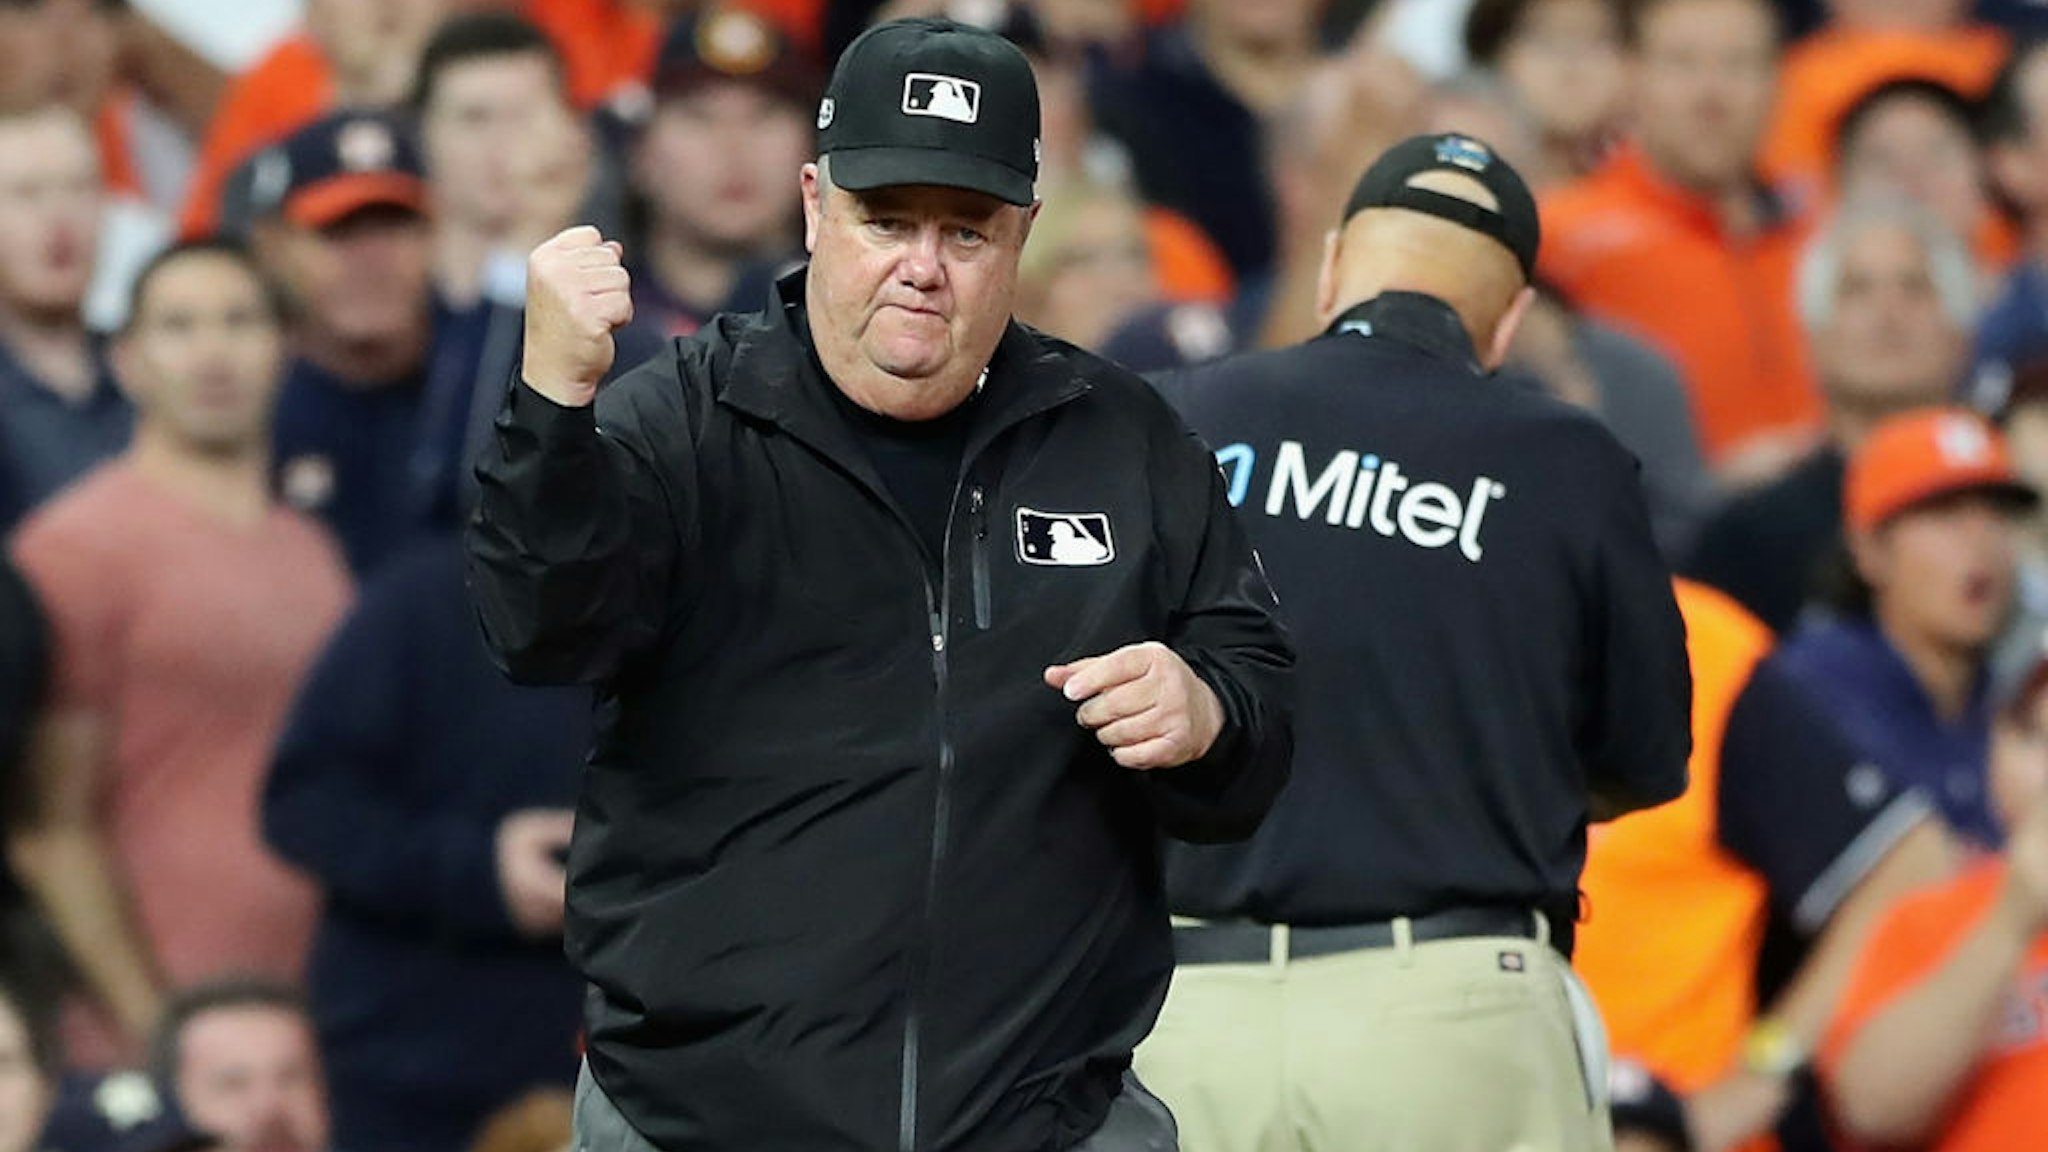 HOUSTON, TX - OCTOBER 17: Umpire Joe West calls out Jose Altuve #27 of the Houston Astros (not pictured) on fan interference in the first inning during Game Four of the American League Championship Series between the Boston Red Sox and the Houston Astros at Minute Maid Park on October 17, 2018 in Houston, Texas. (Photo by Elsa/Getty Images)